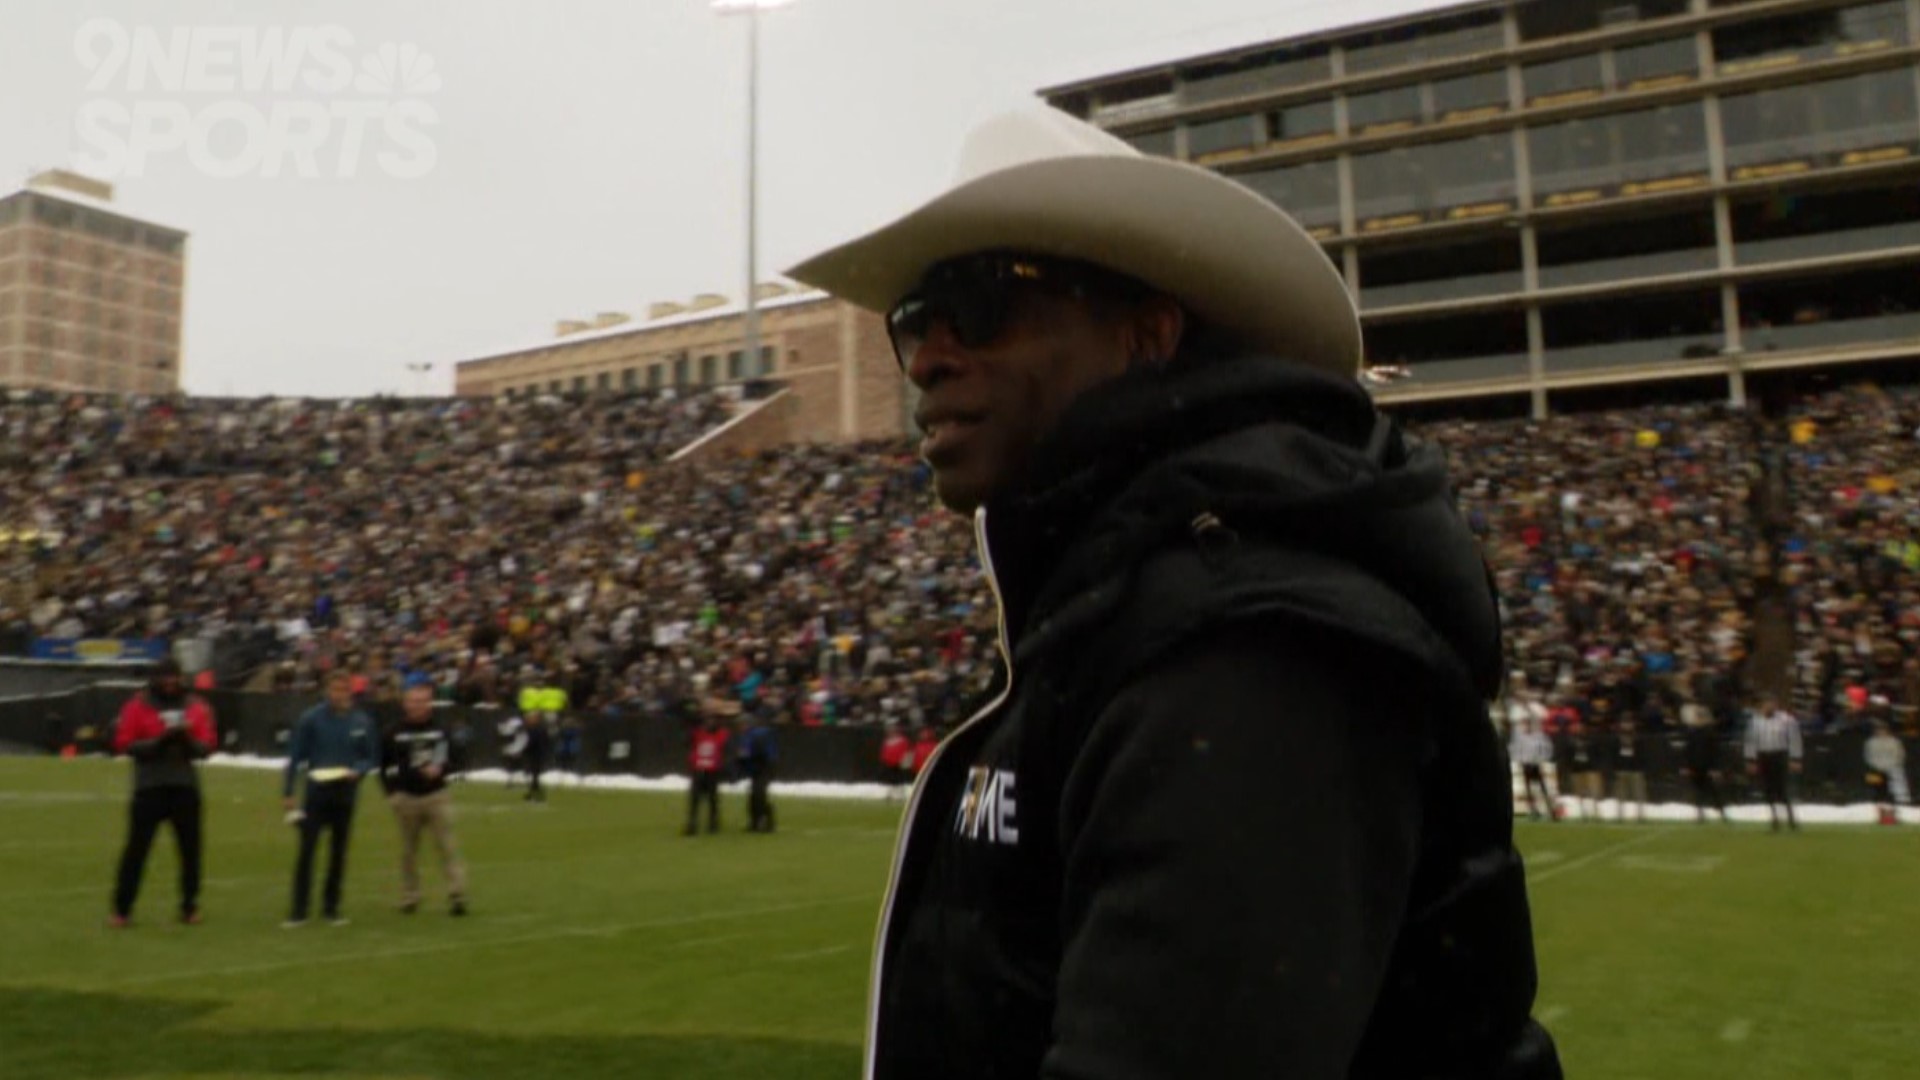 The University of Colorado spring football game sold out for the first time with Deion Sanders at the helm of the program.